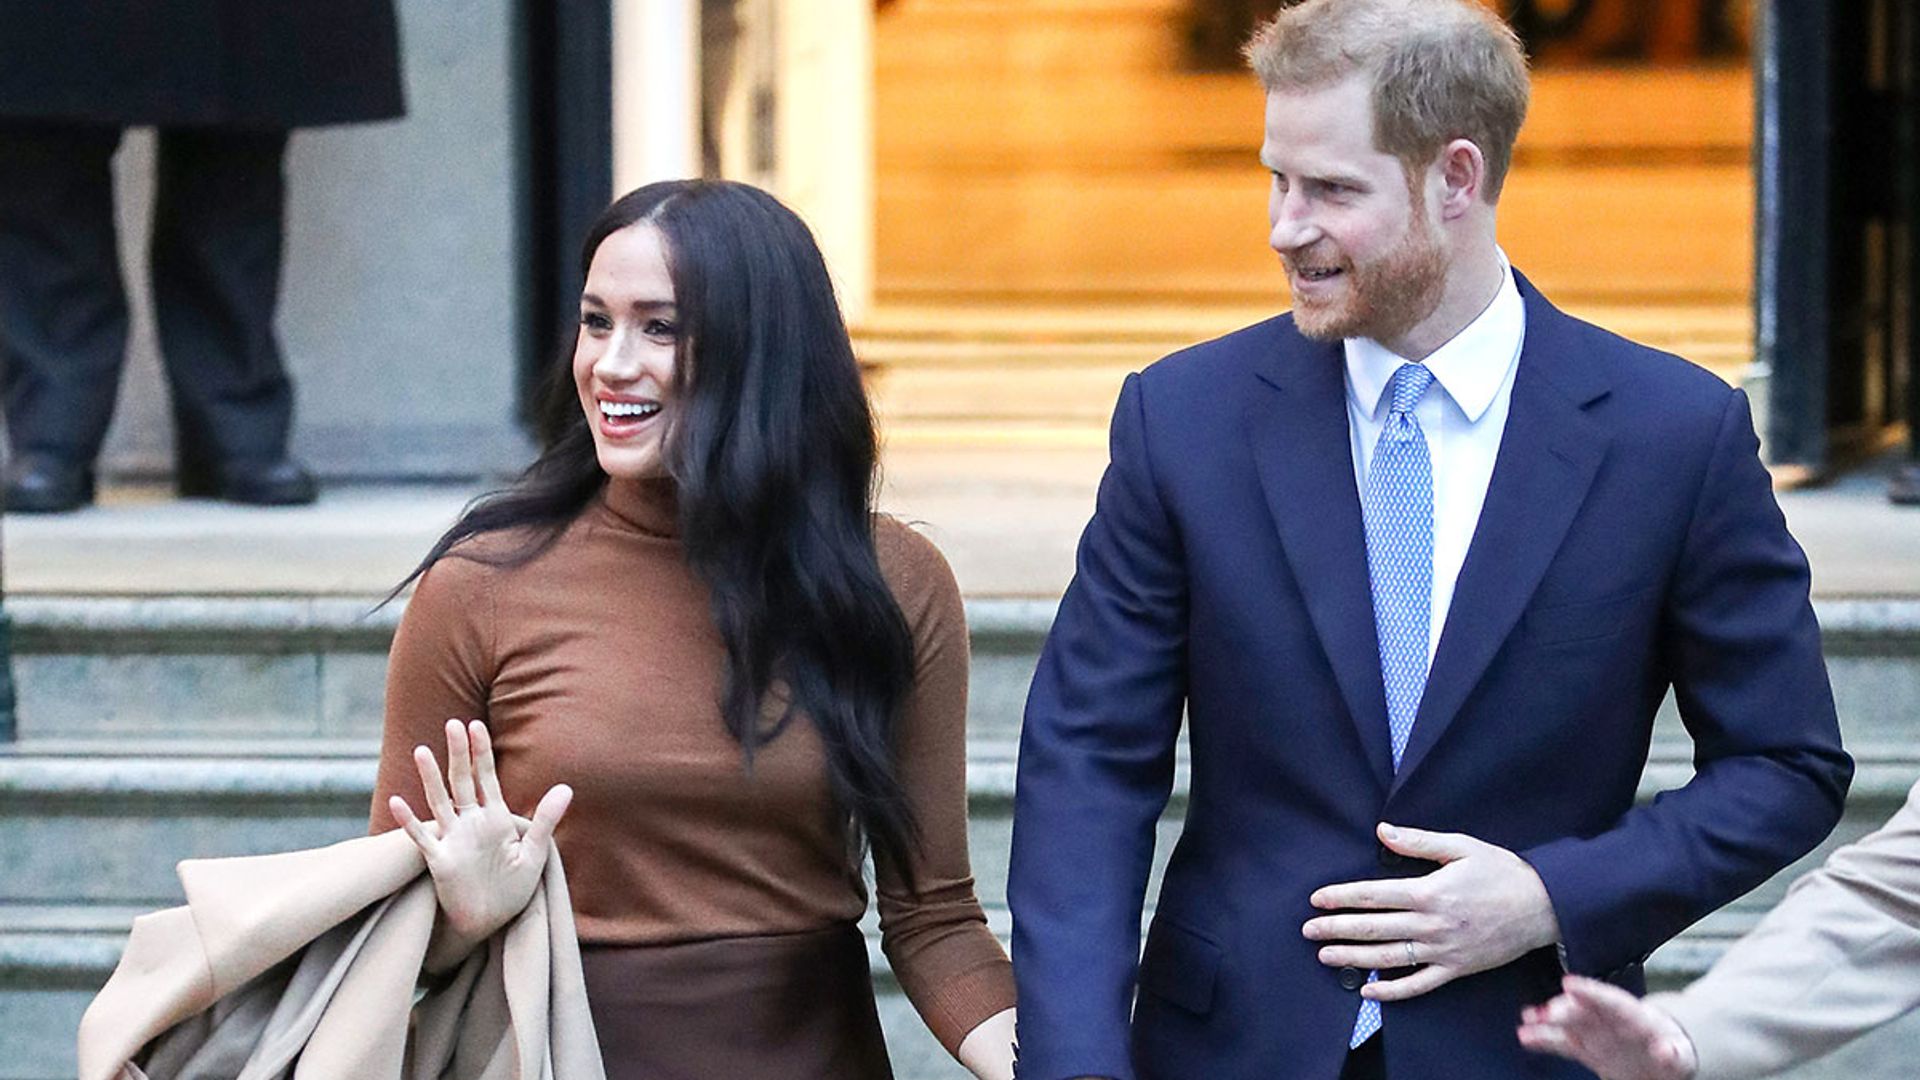 Prince Harry takes Meghan Markle for Tea to meet the Queen